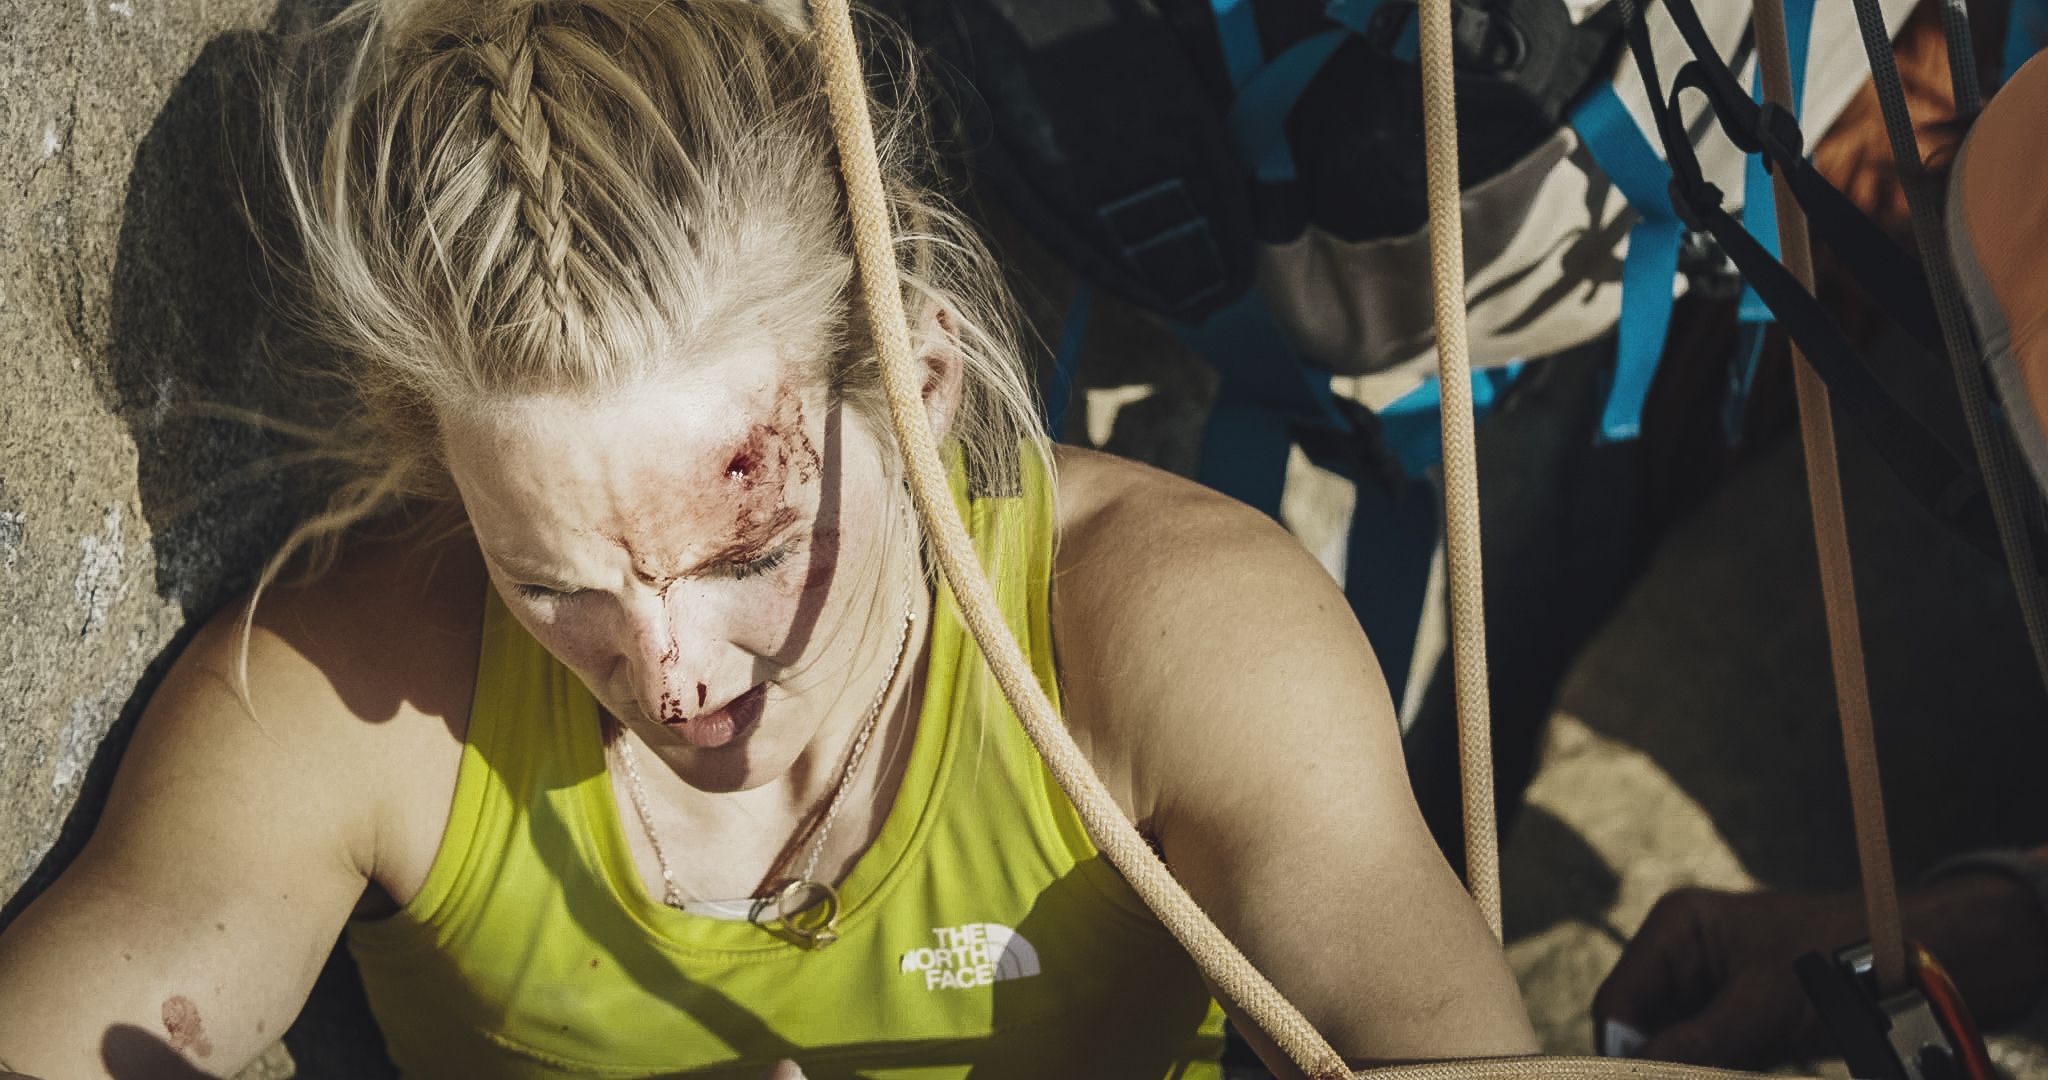 Harrington recovering from the fall on the Golden Desert pitch that left her bloodied. [Photo] Jon Glassberg, Louder Than 11